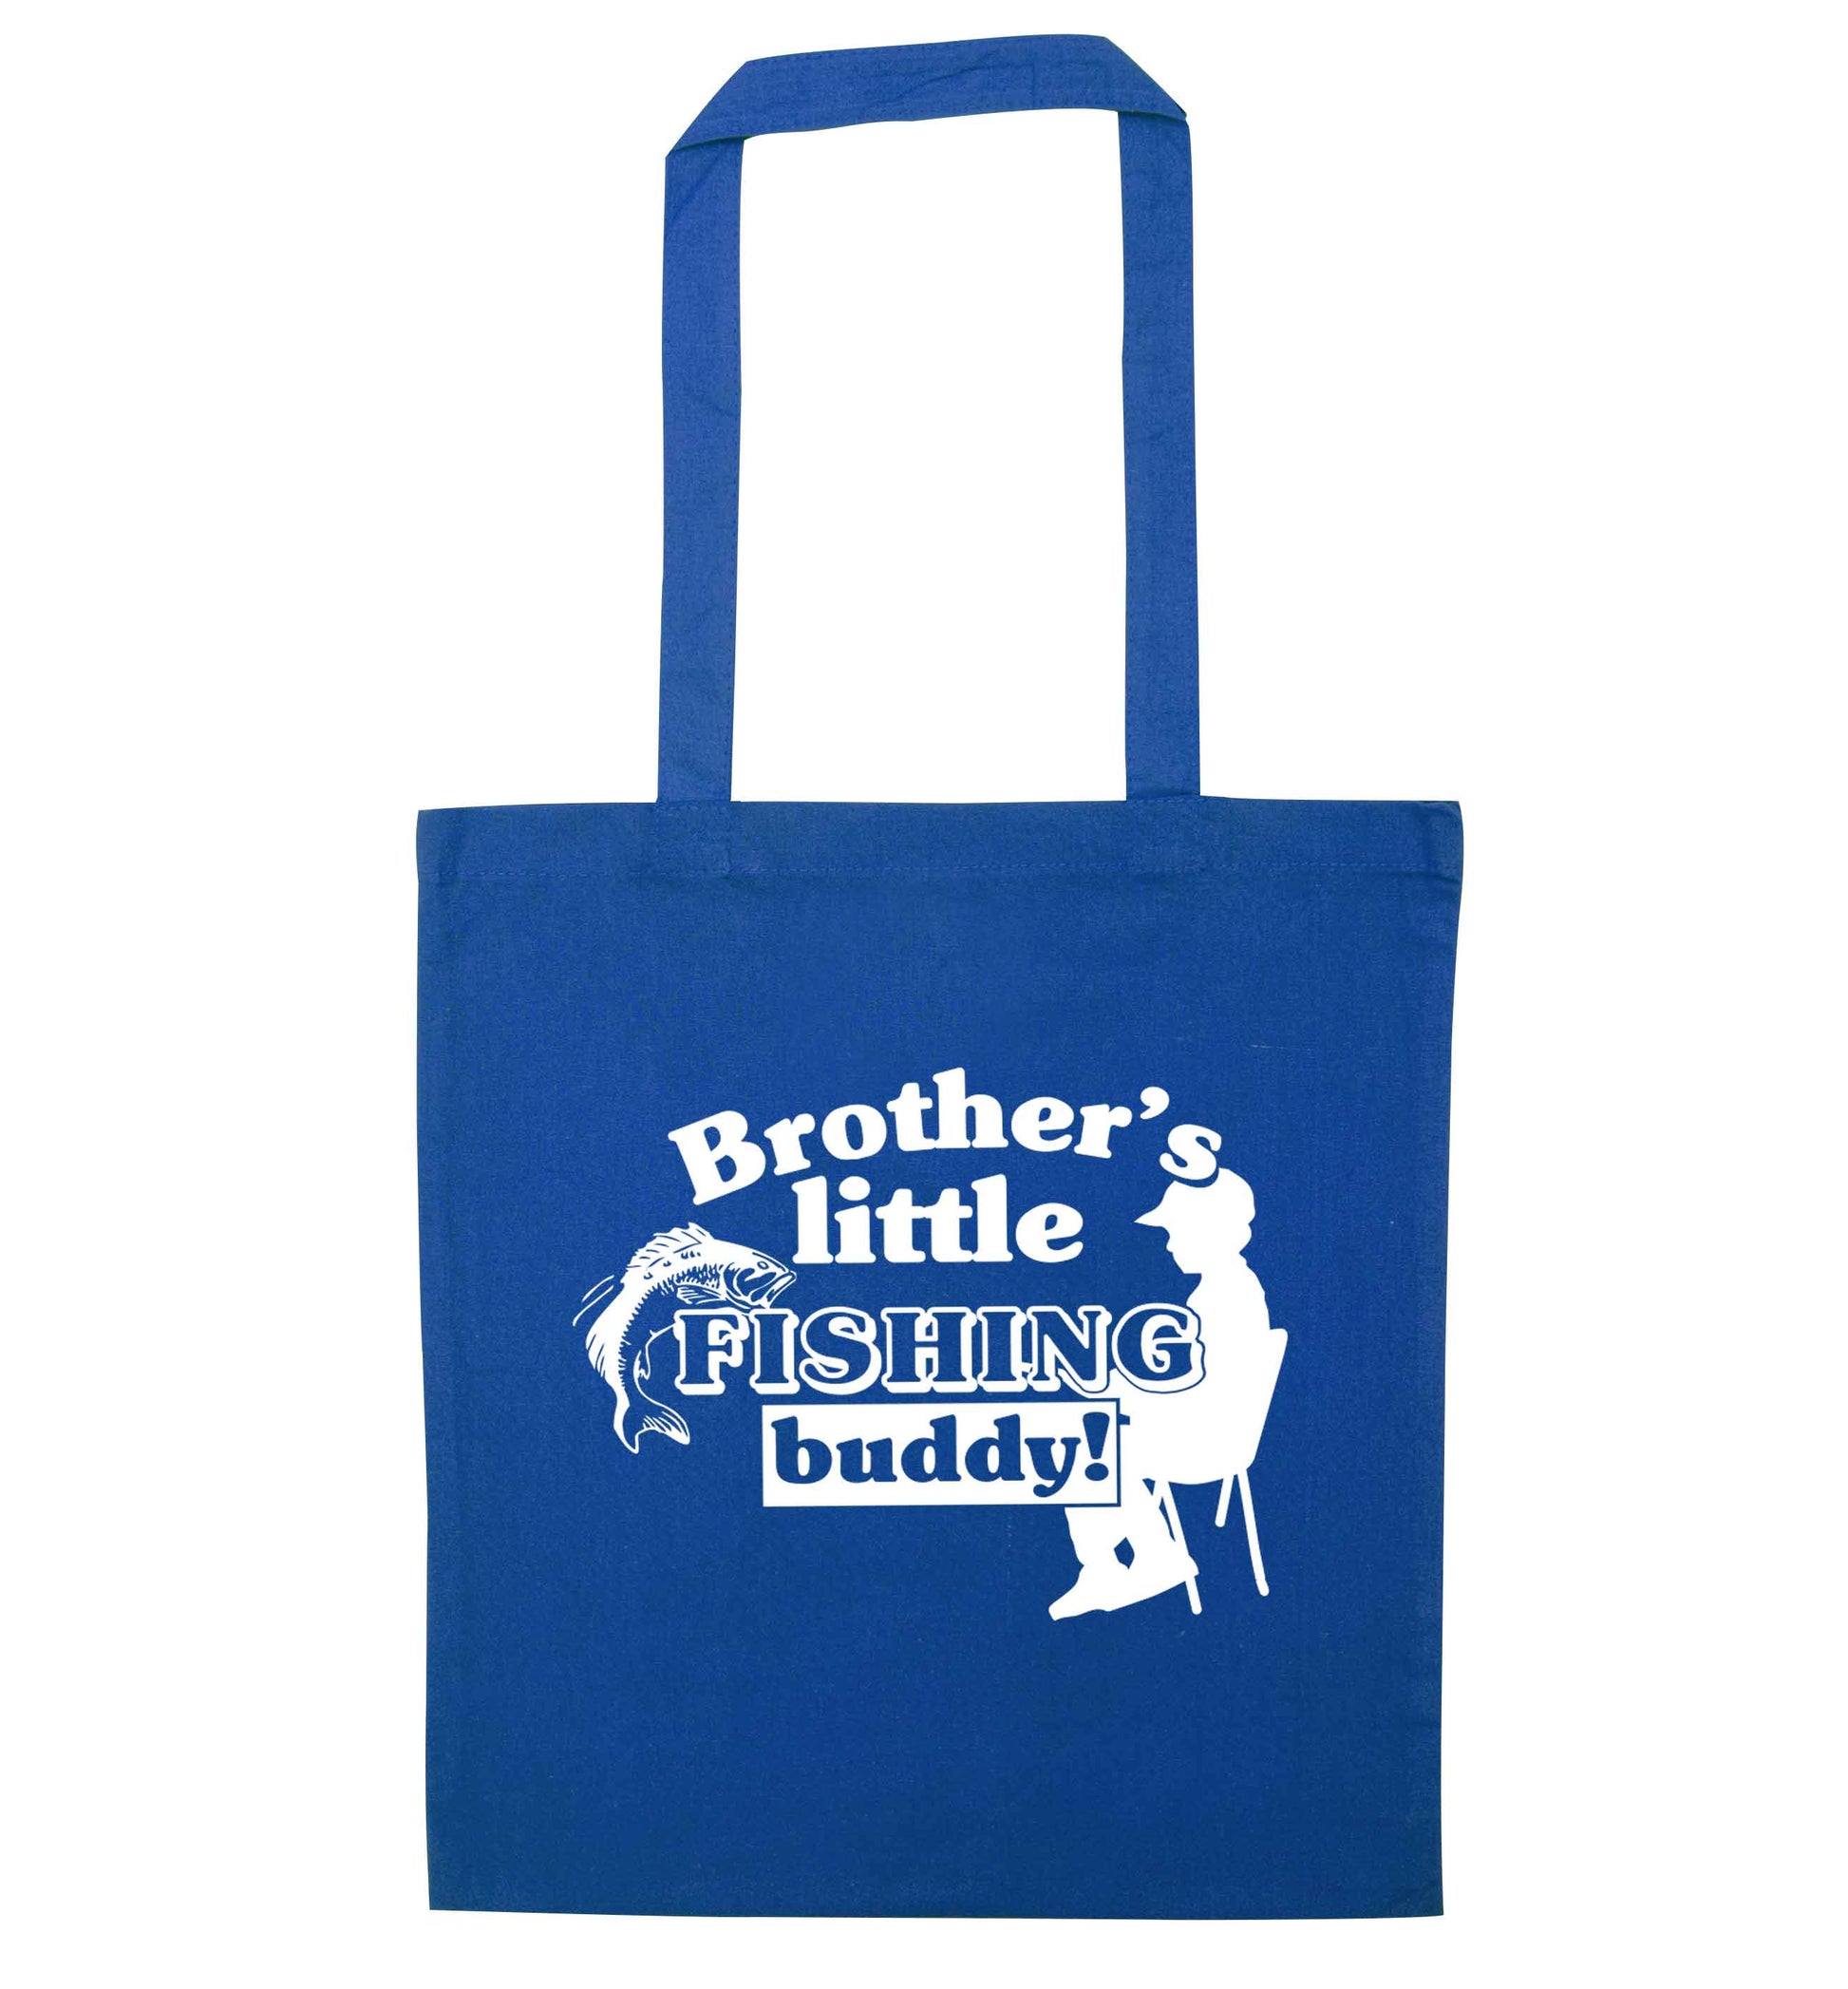 Brother's little fishing buddy blue tote bag